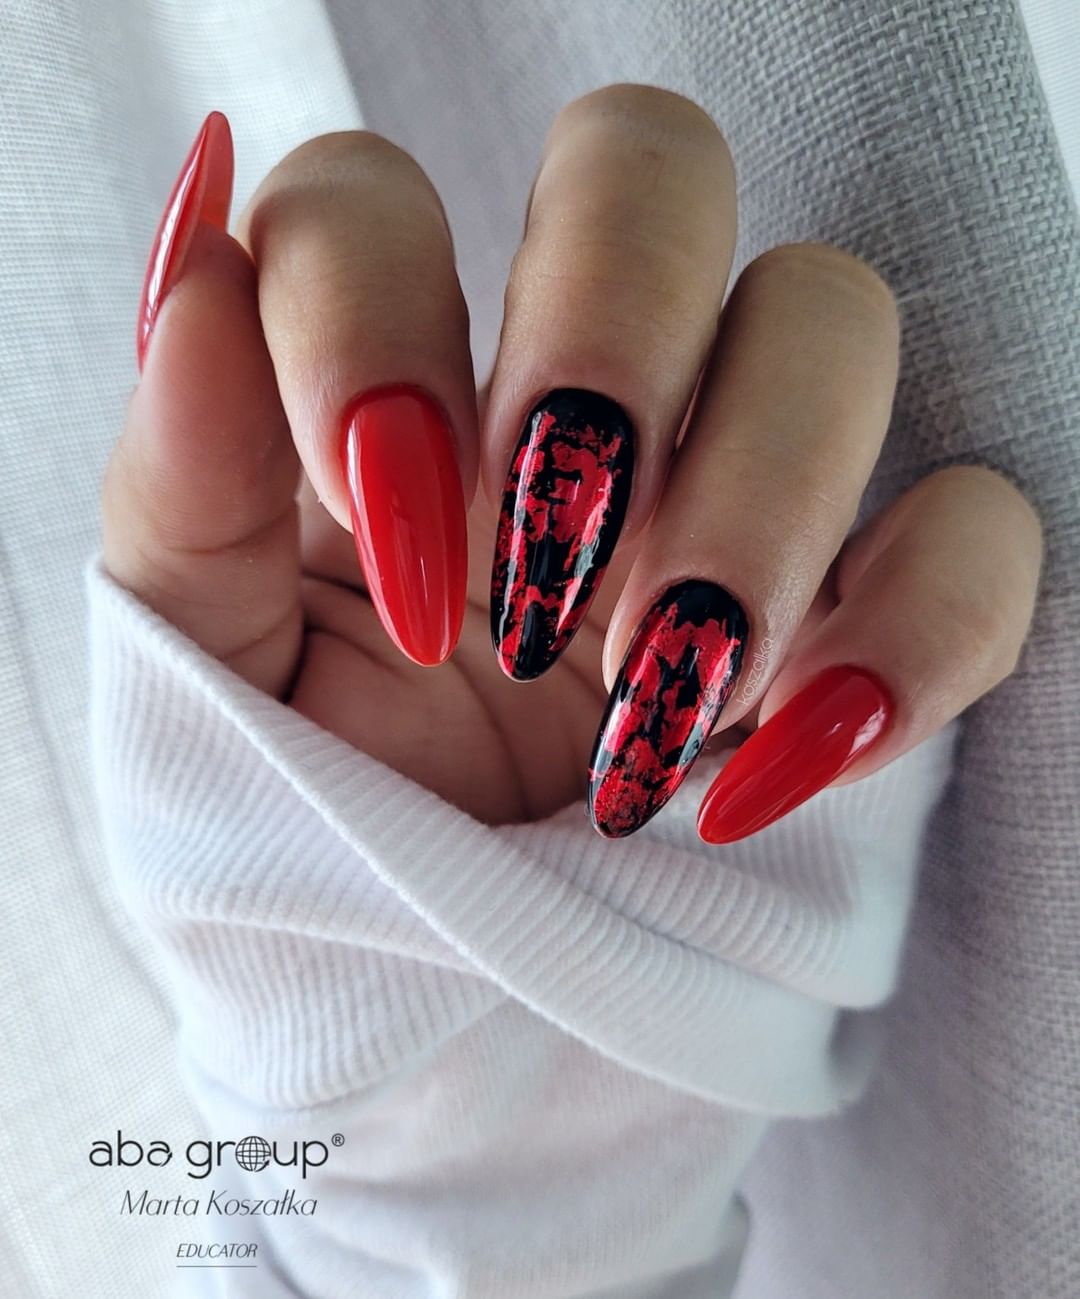 Long Glossy Red and Black Nails with Red Foil